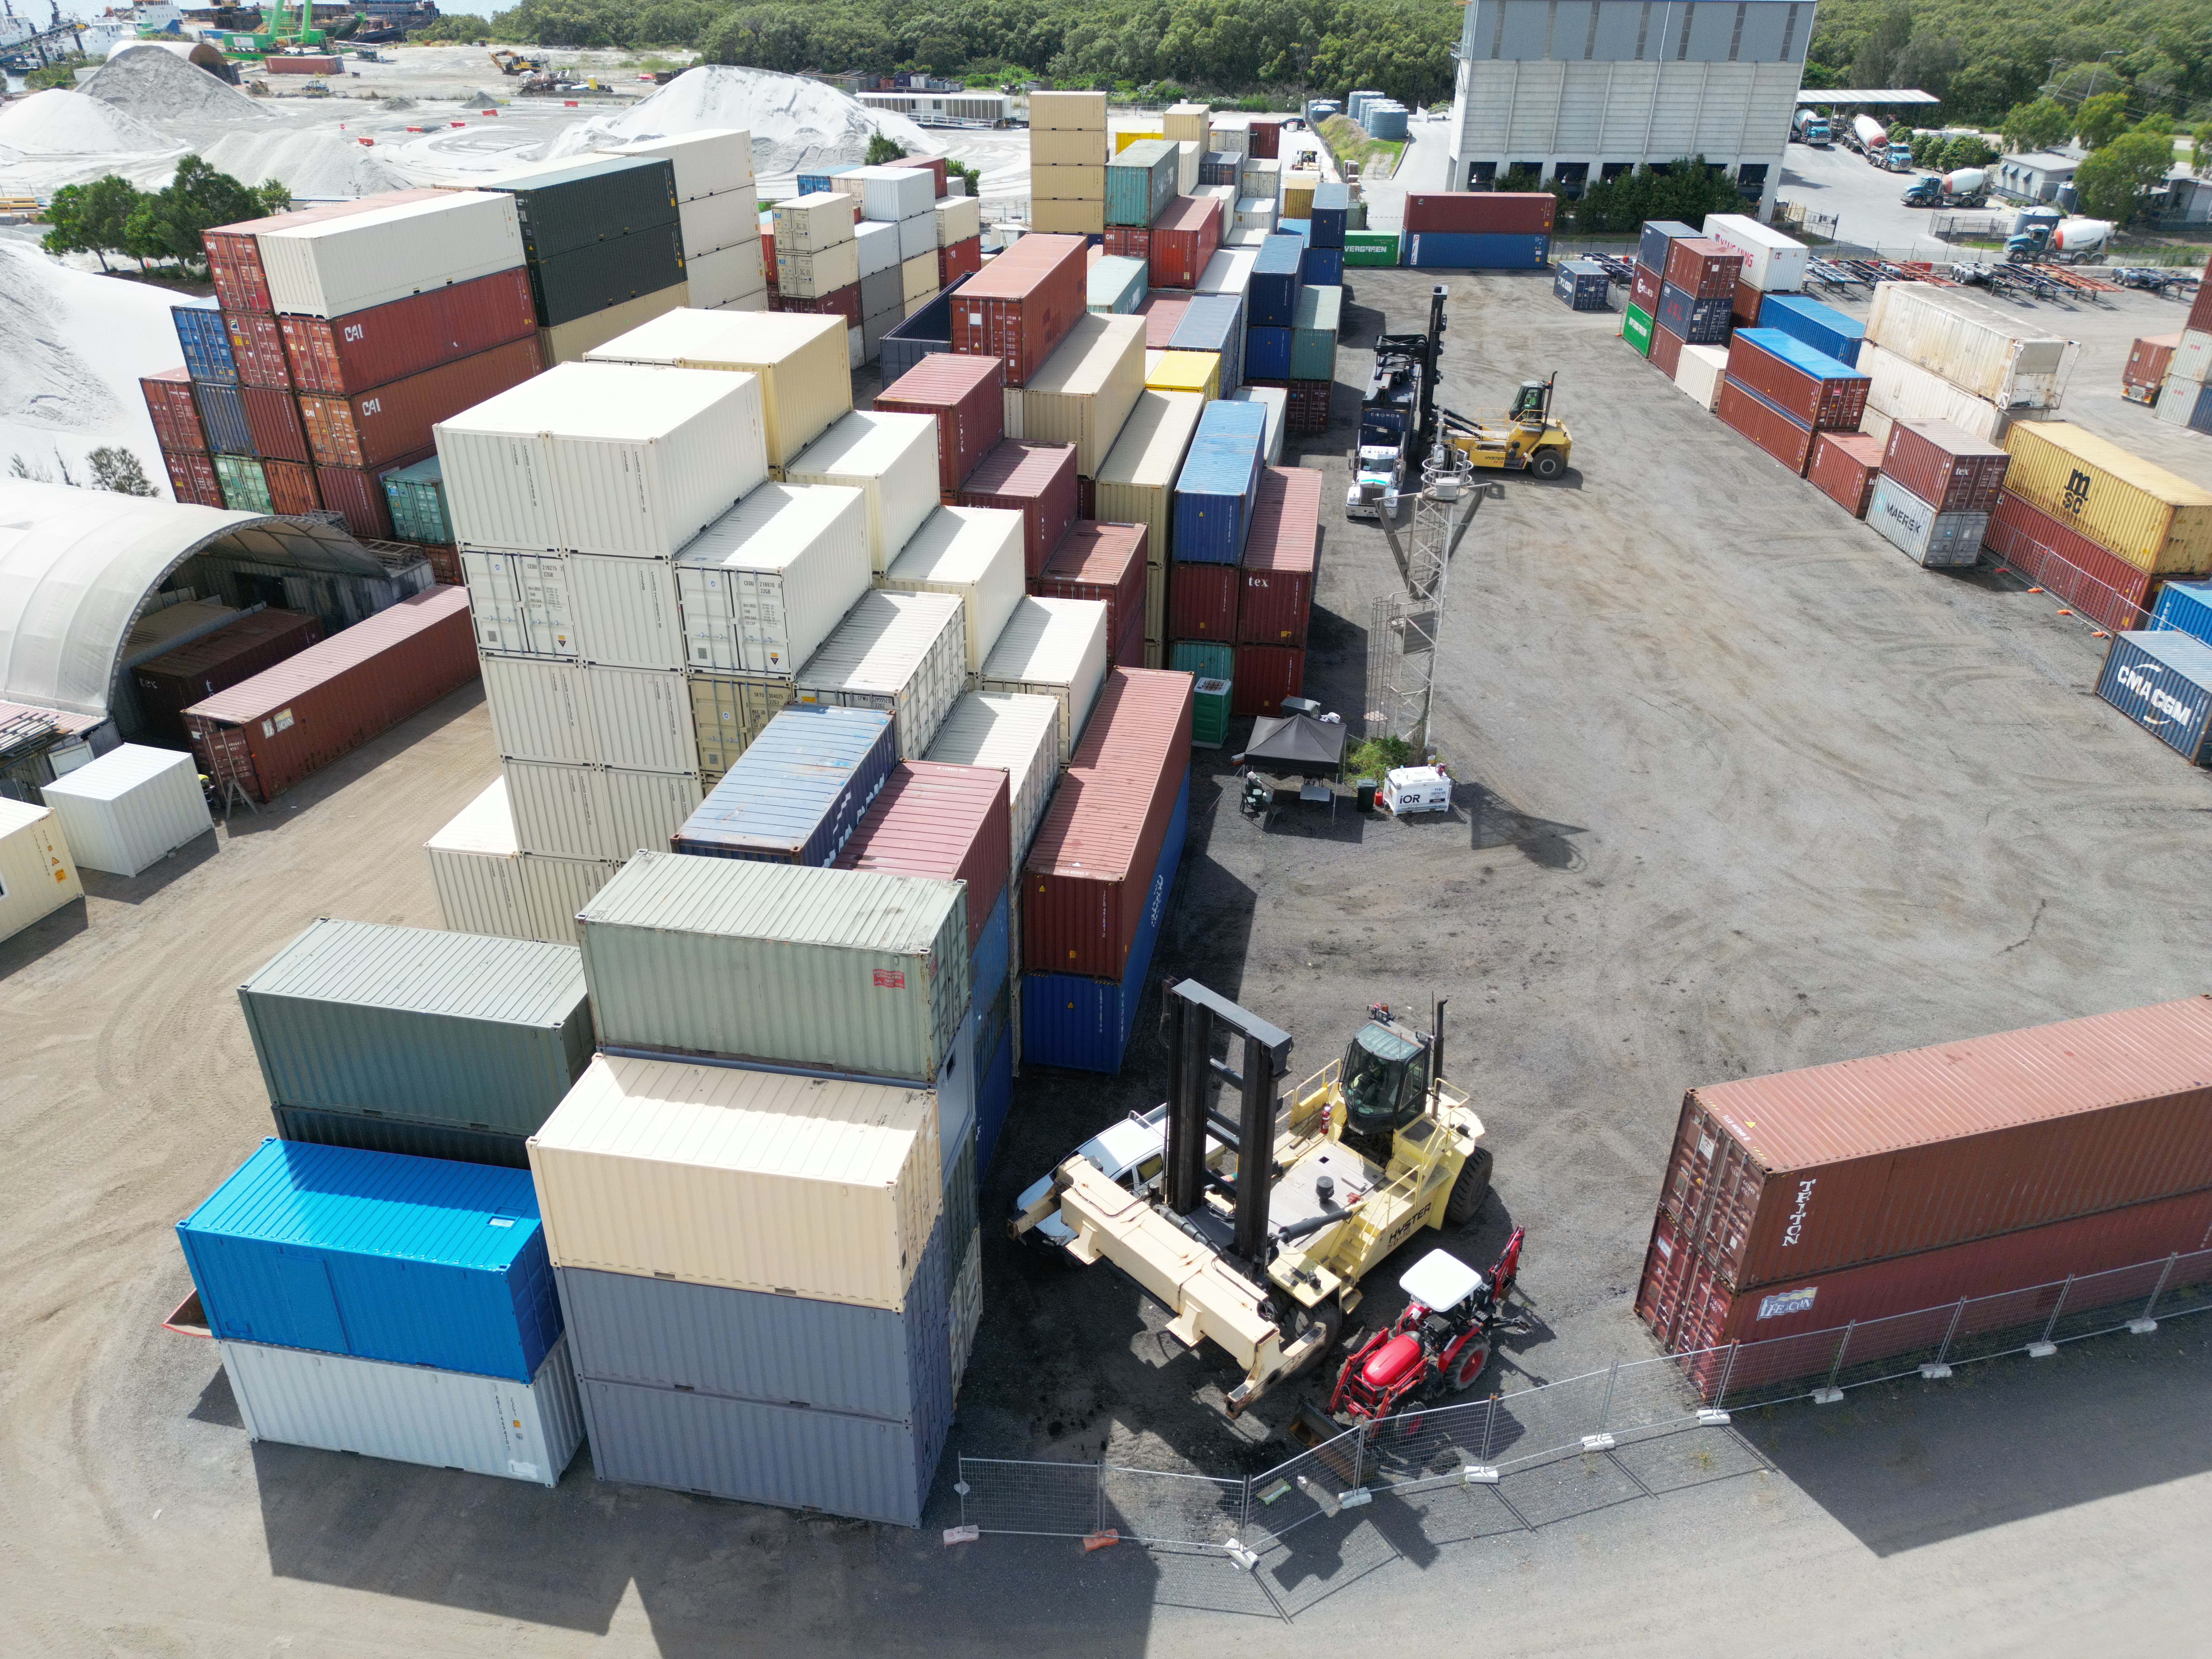 Picture of a shipping container depot